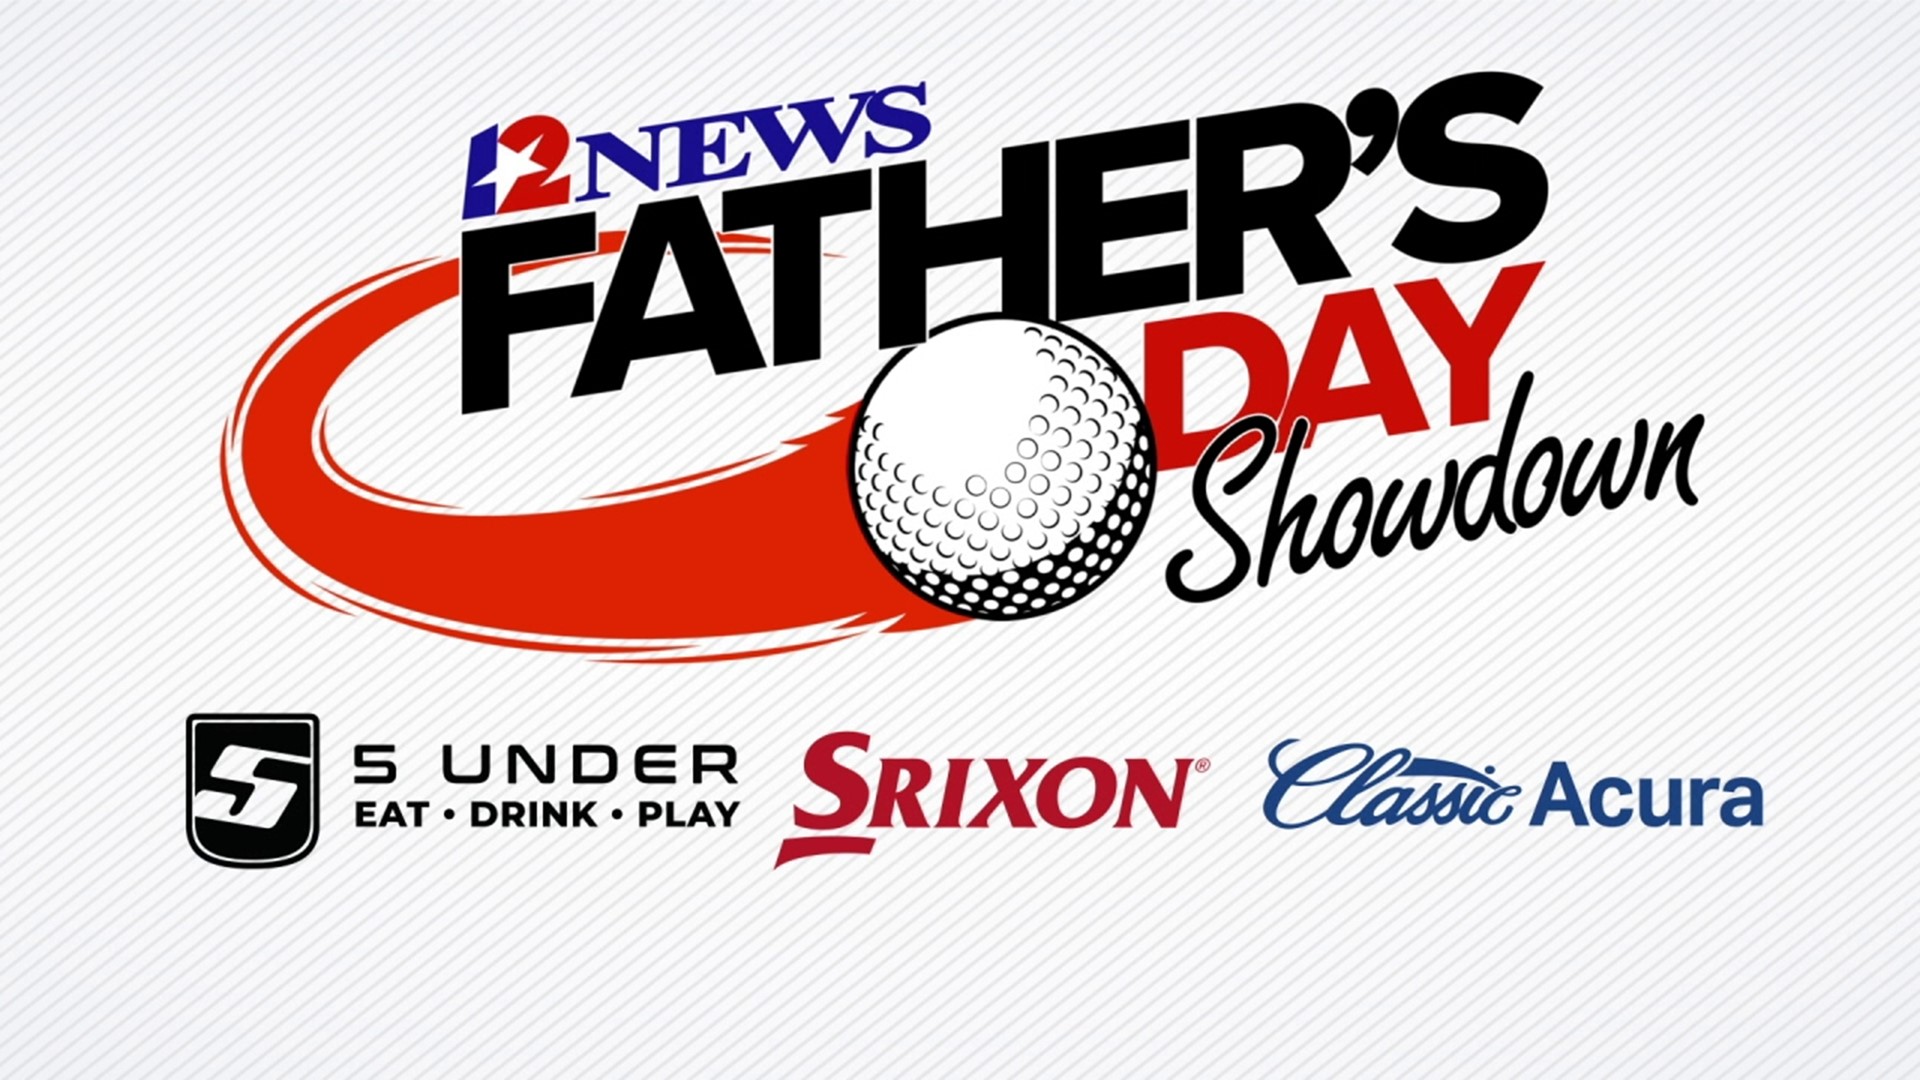 Eight randomly selected Southeast Texas dads competed in the Father's Day Showdown Longest Drive contest sponsored by 5 Under Golf Center, Srixon and Classic Acura.